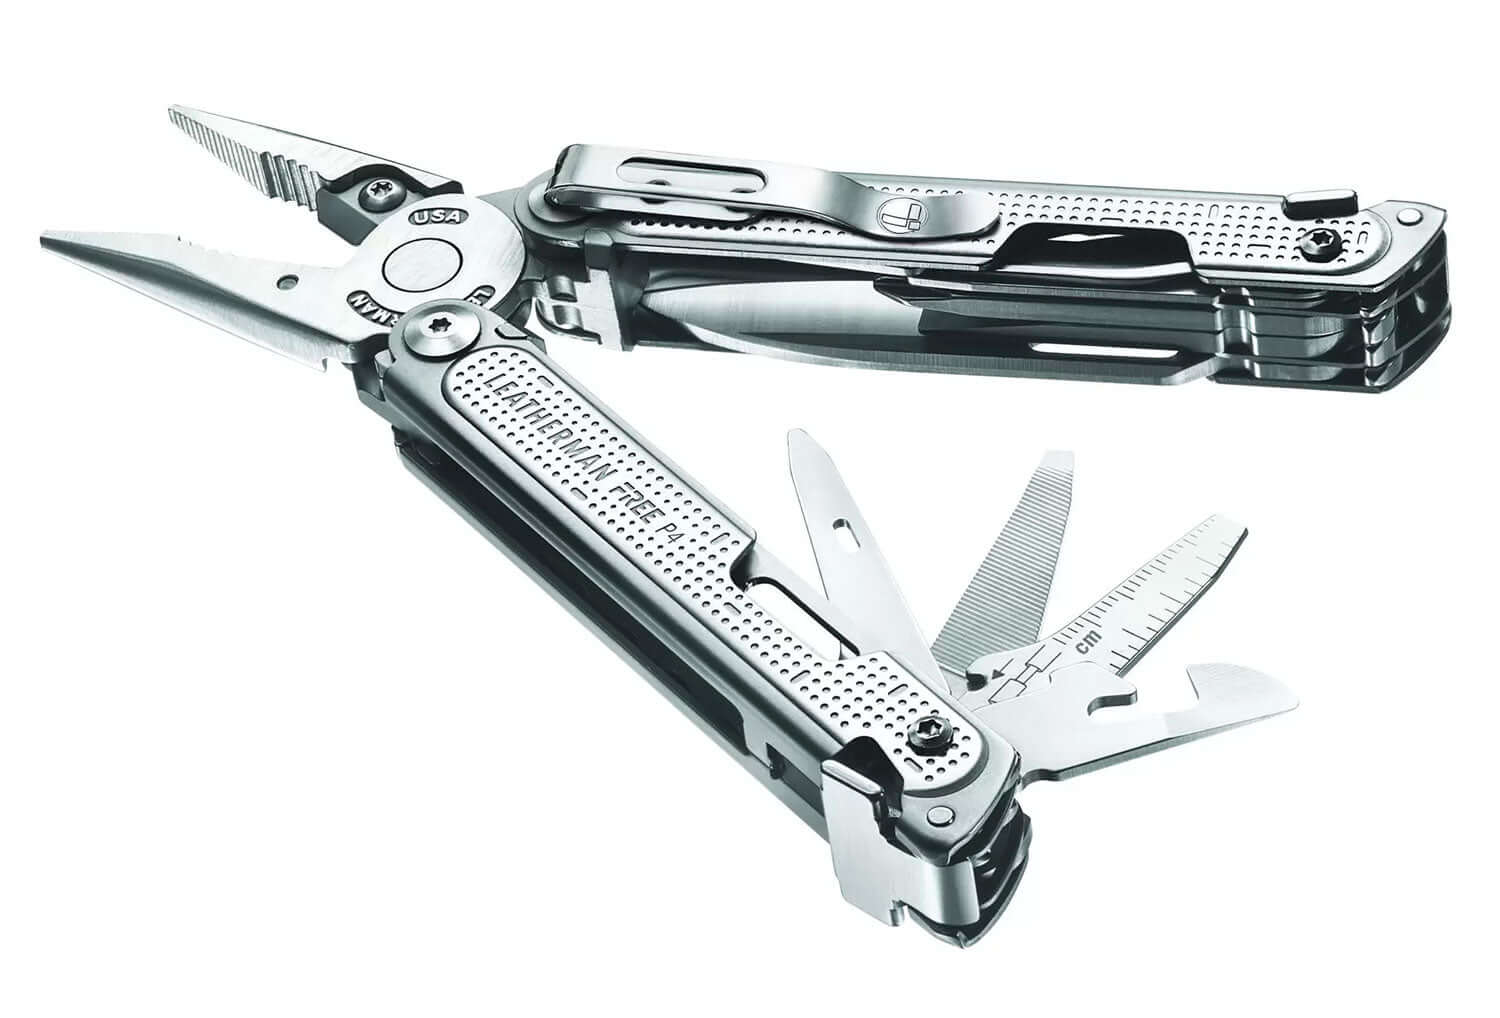 Classic Single handed stainless steel multi tool